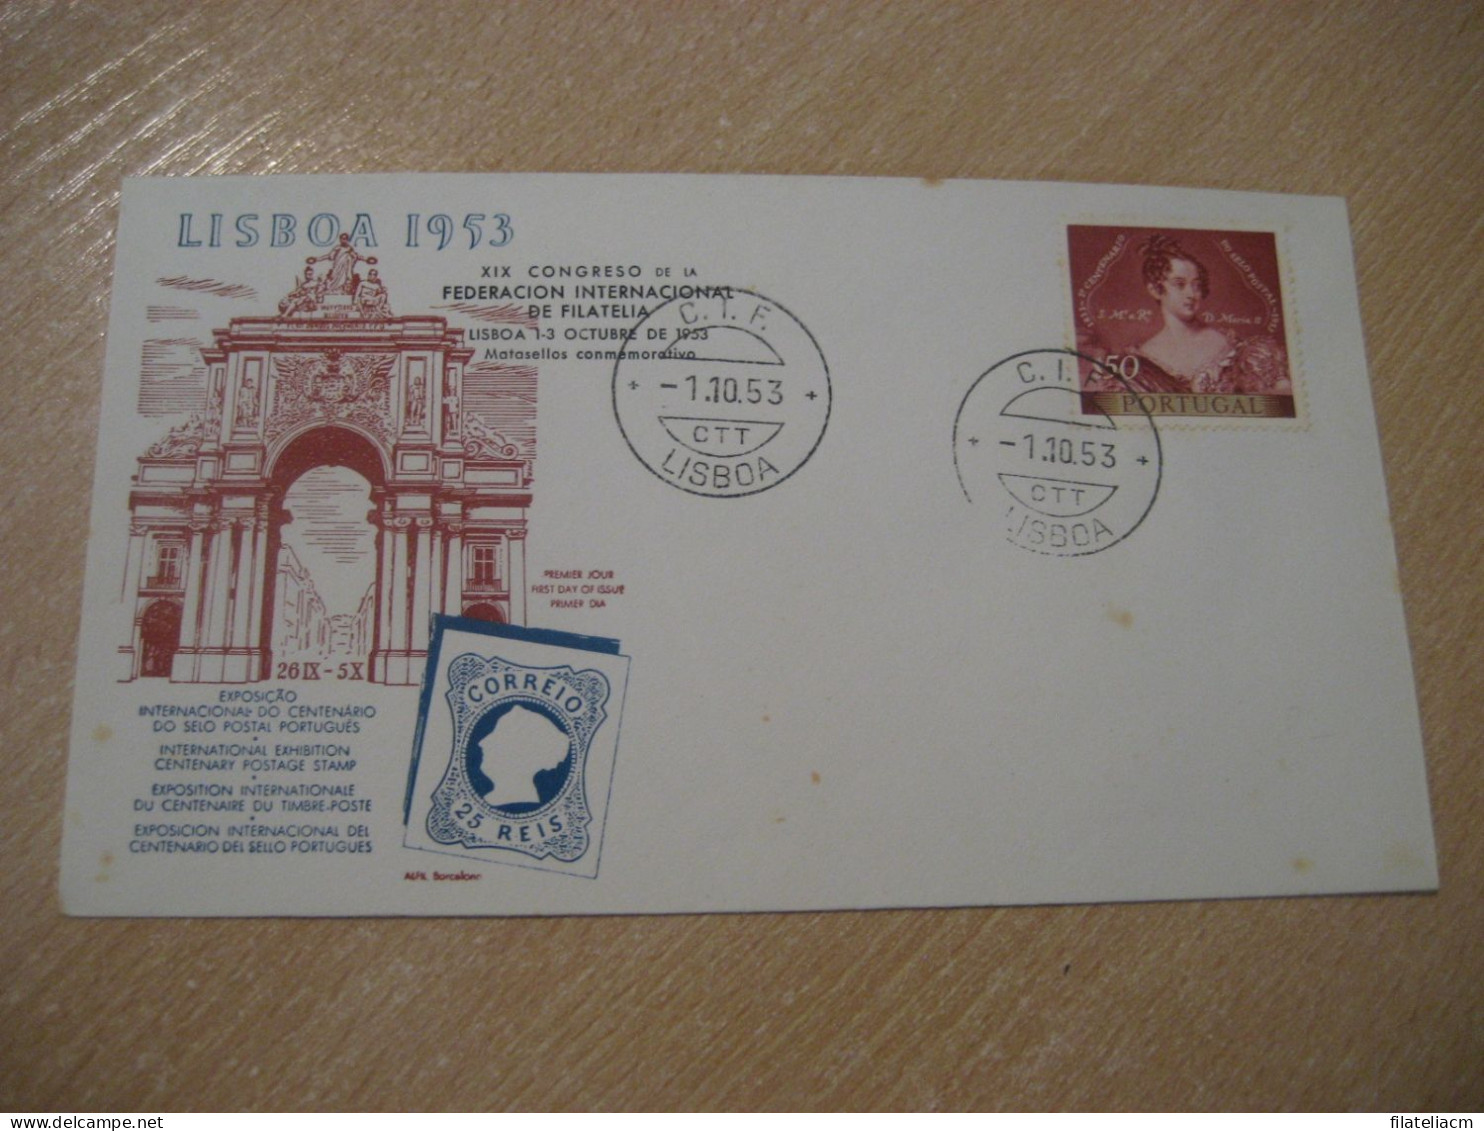 LISBOA 1953 C.I.F. CIF Expo Filatelica Int. Centenary Postage Stamp Cancel Cover PORTUGAL - Lettres & Documents